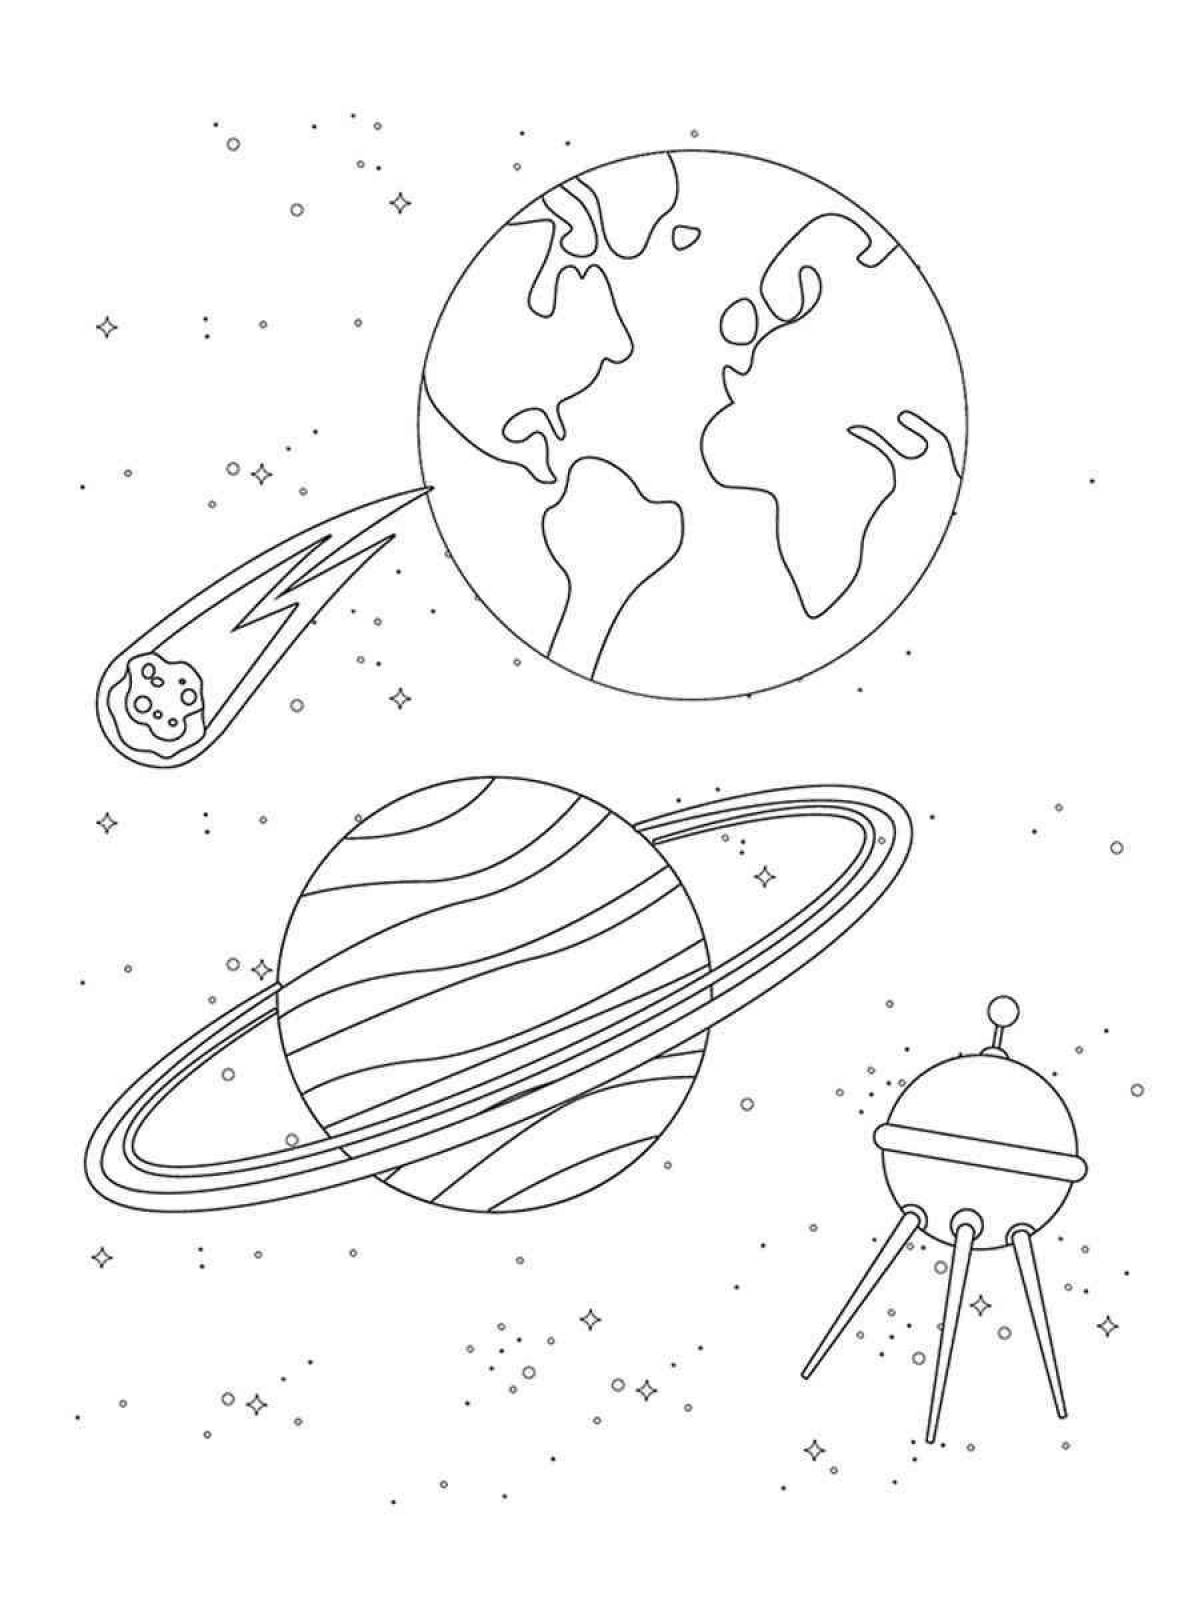 Coloring book joyful planet for children 6-7 years old